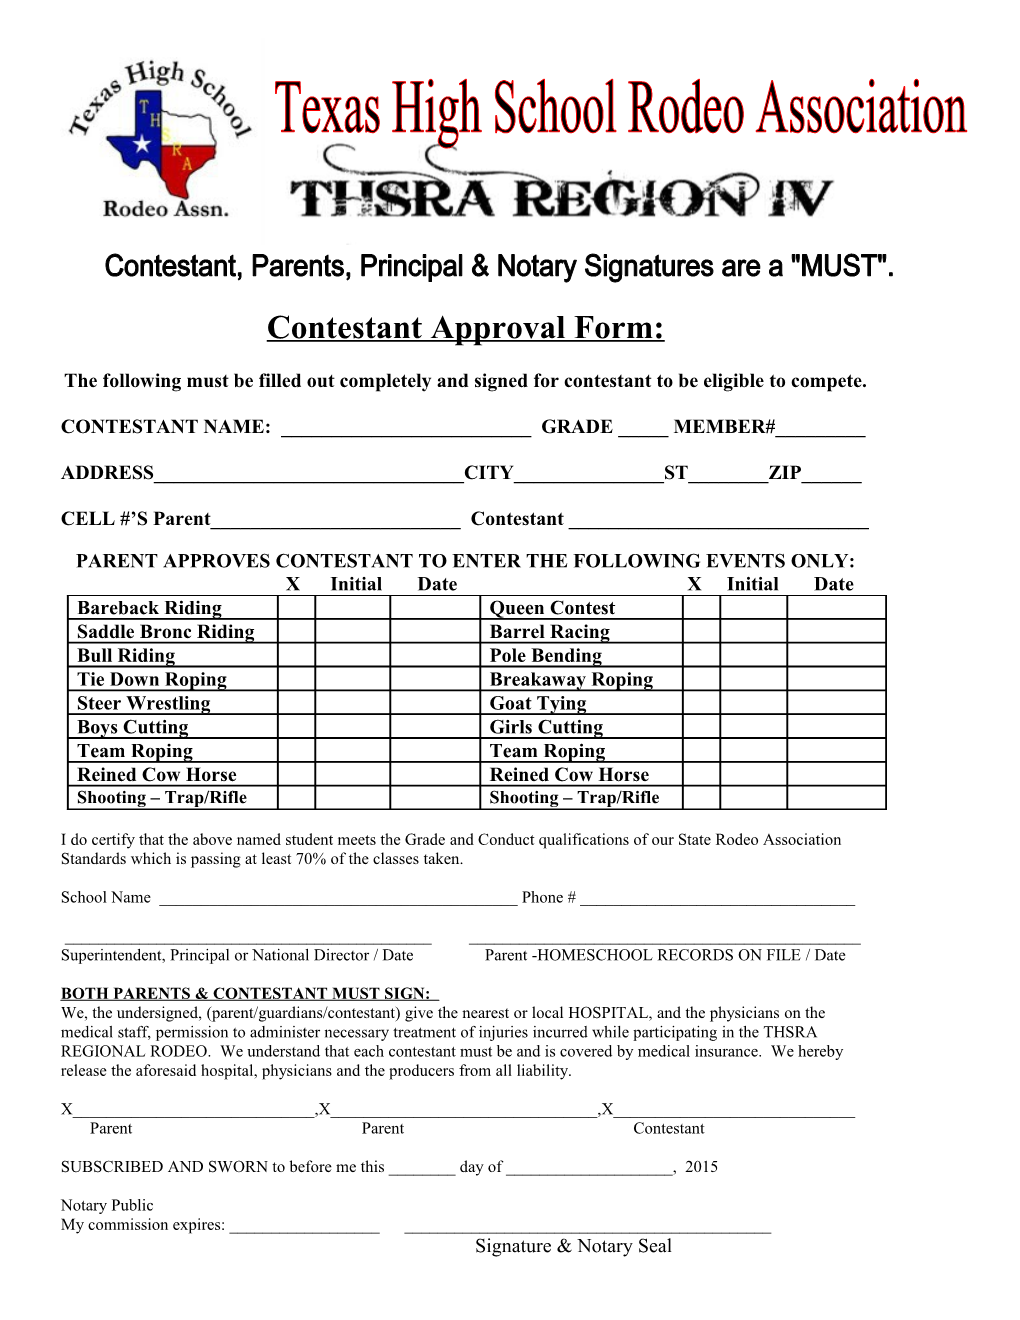 Contestant Approval Form